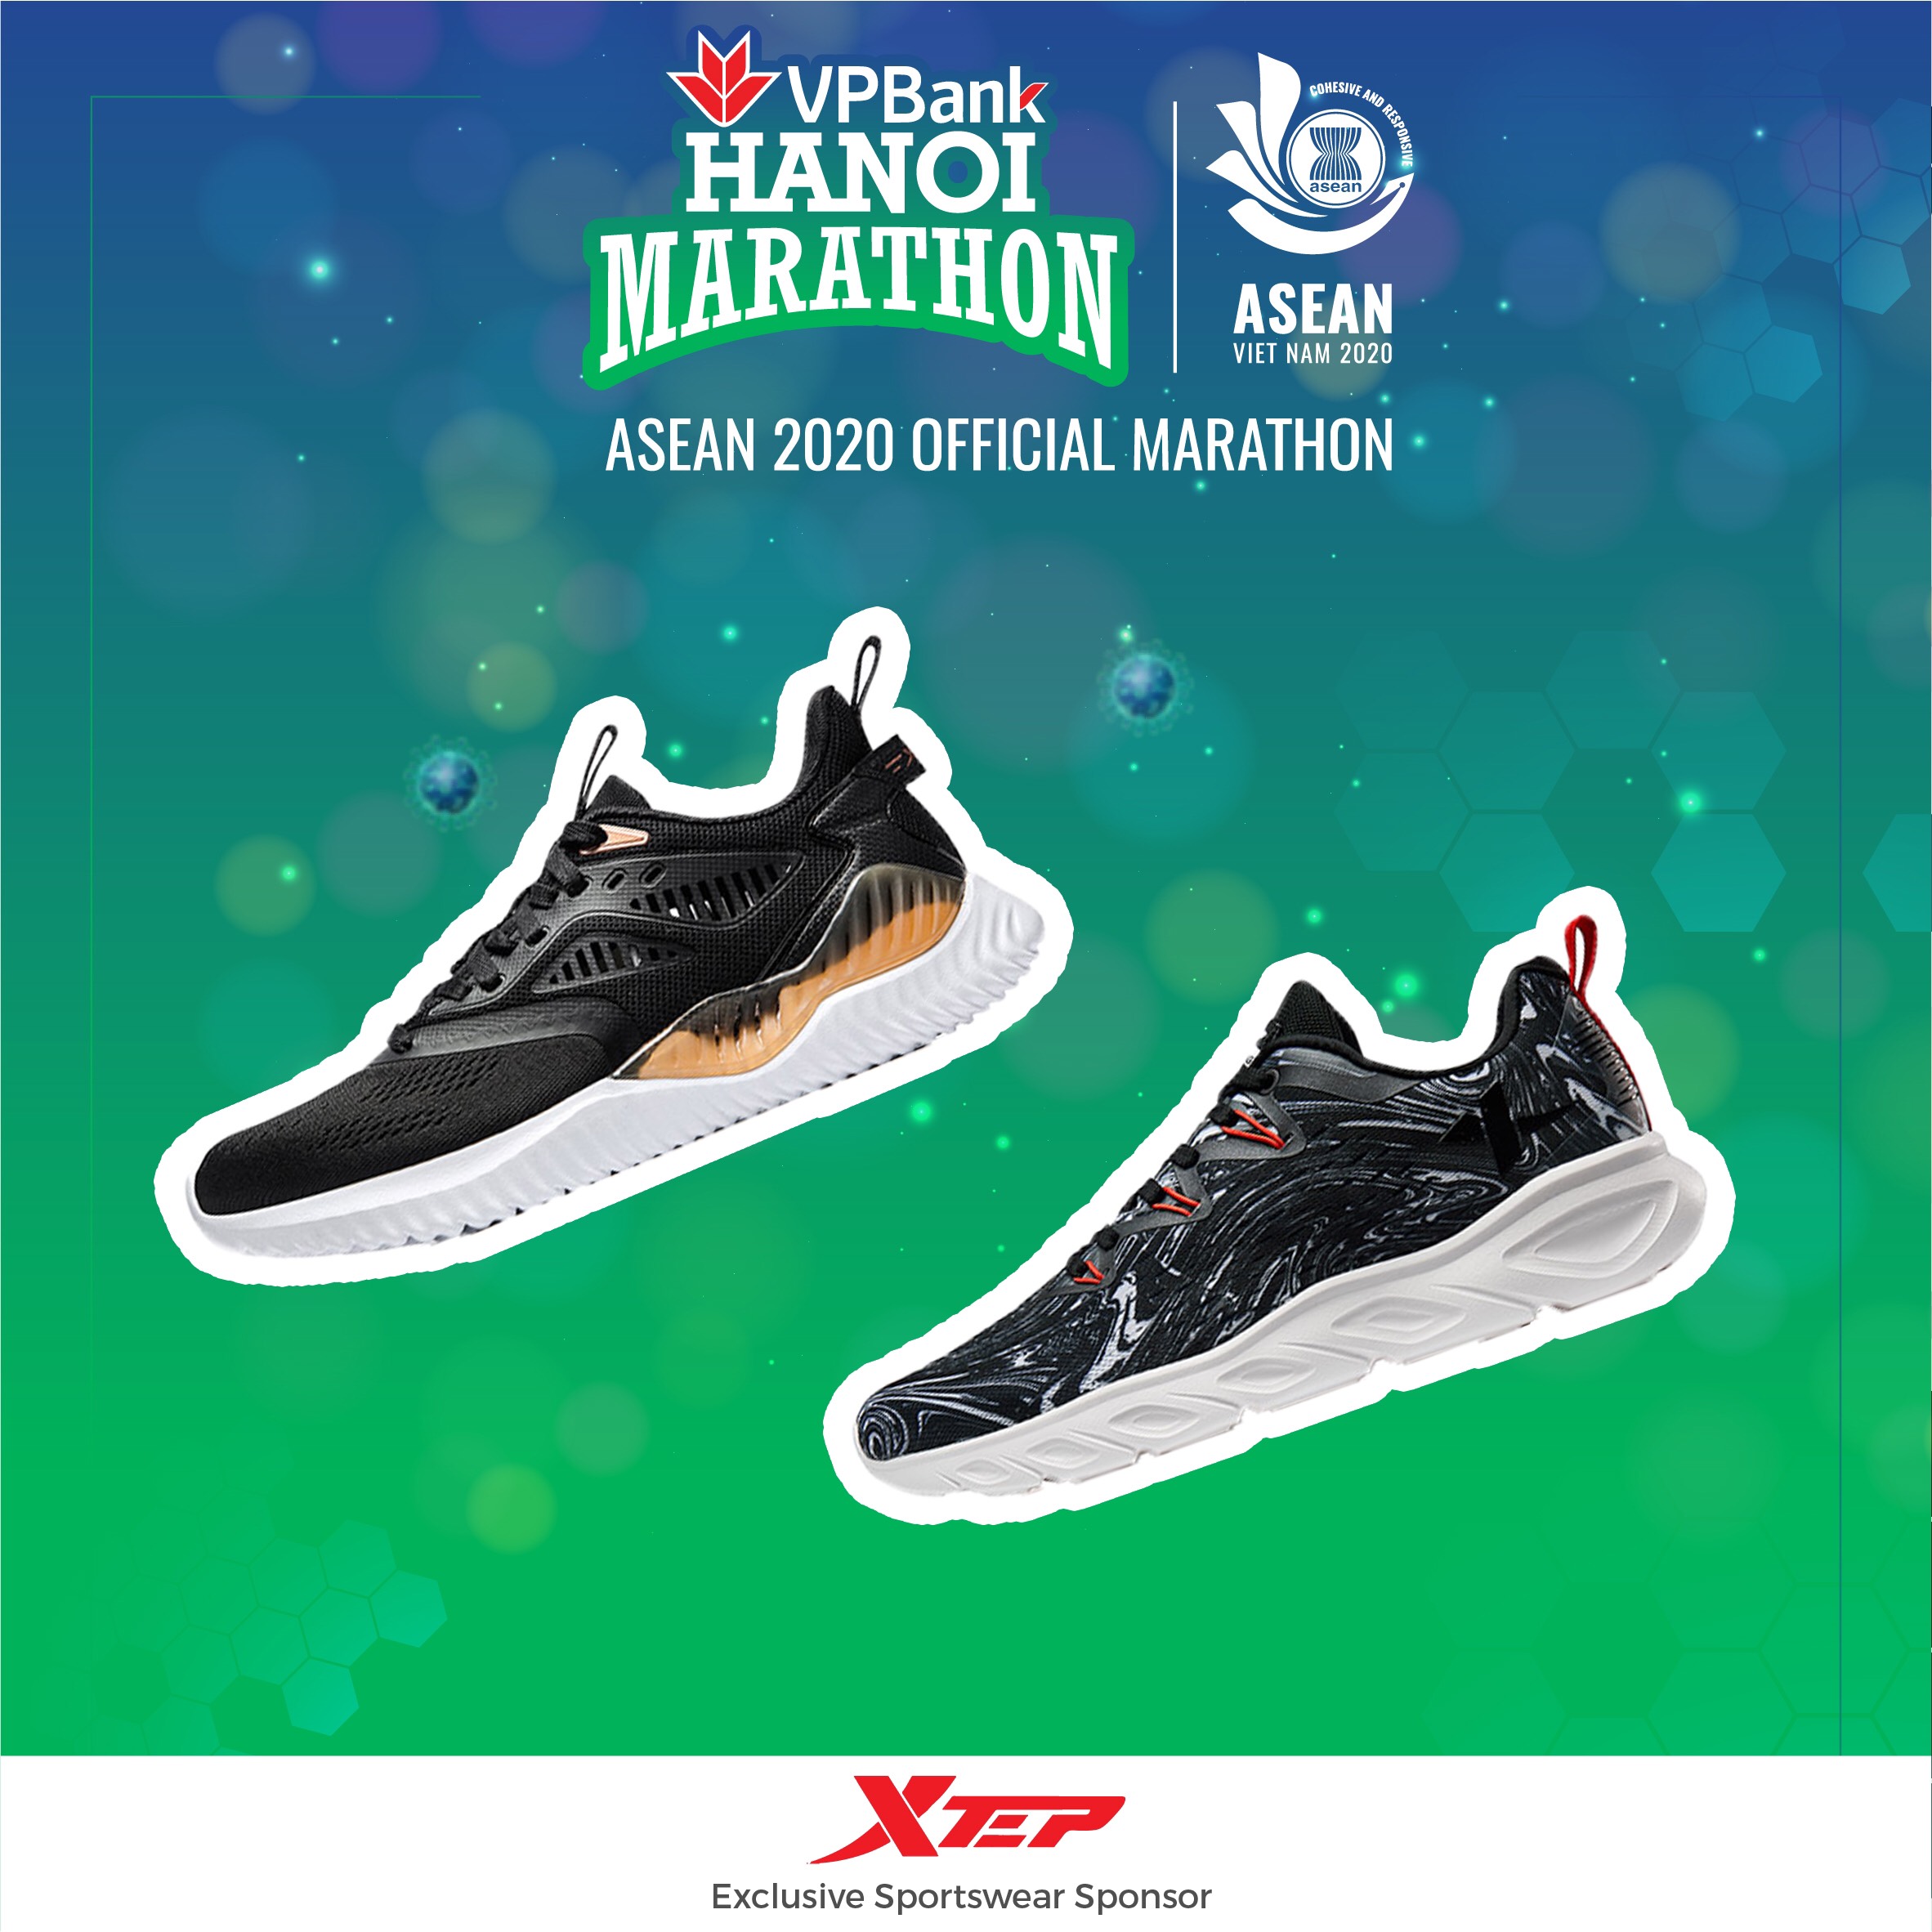 Jogging in Safety, Comfort with Xtep Special Running Shoes - HANOI MARATHON  - Heritage Marathon